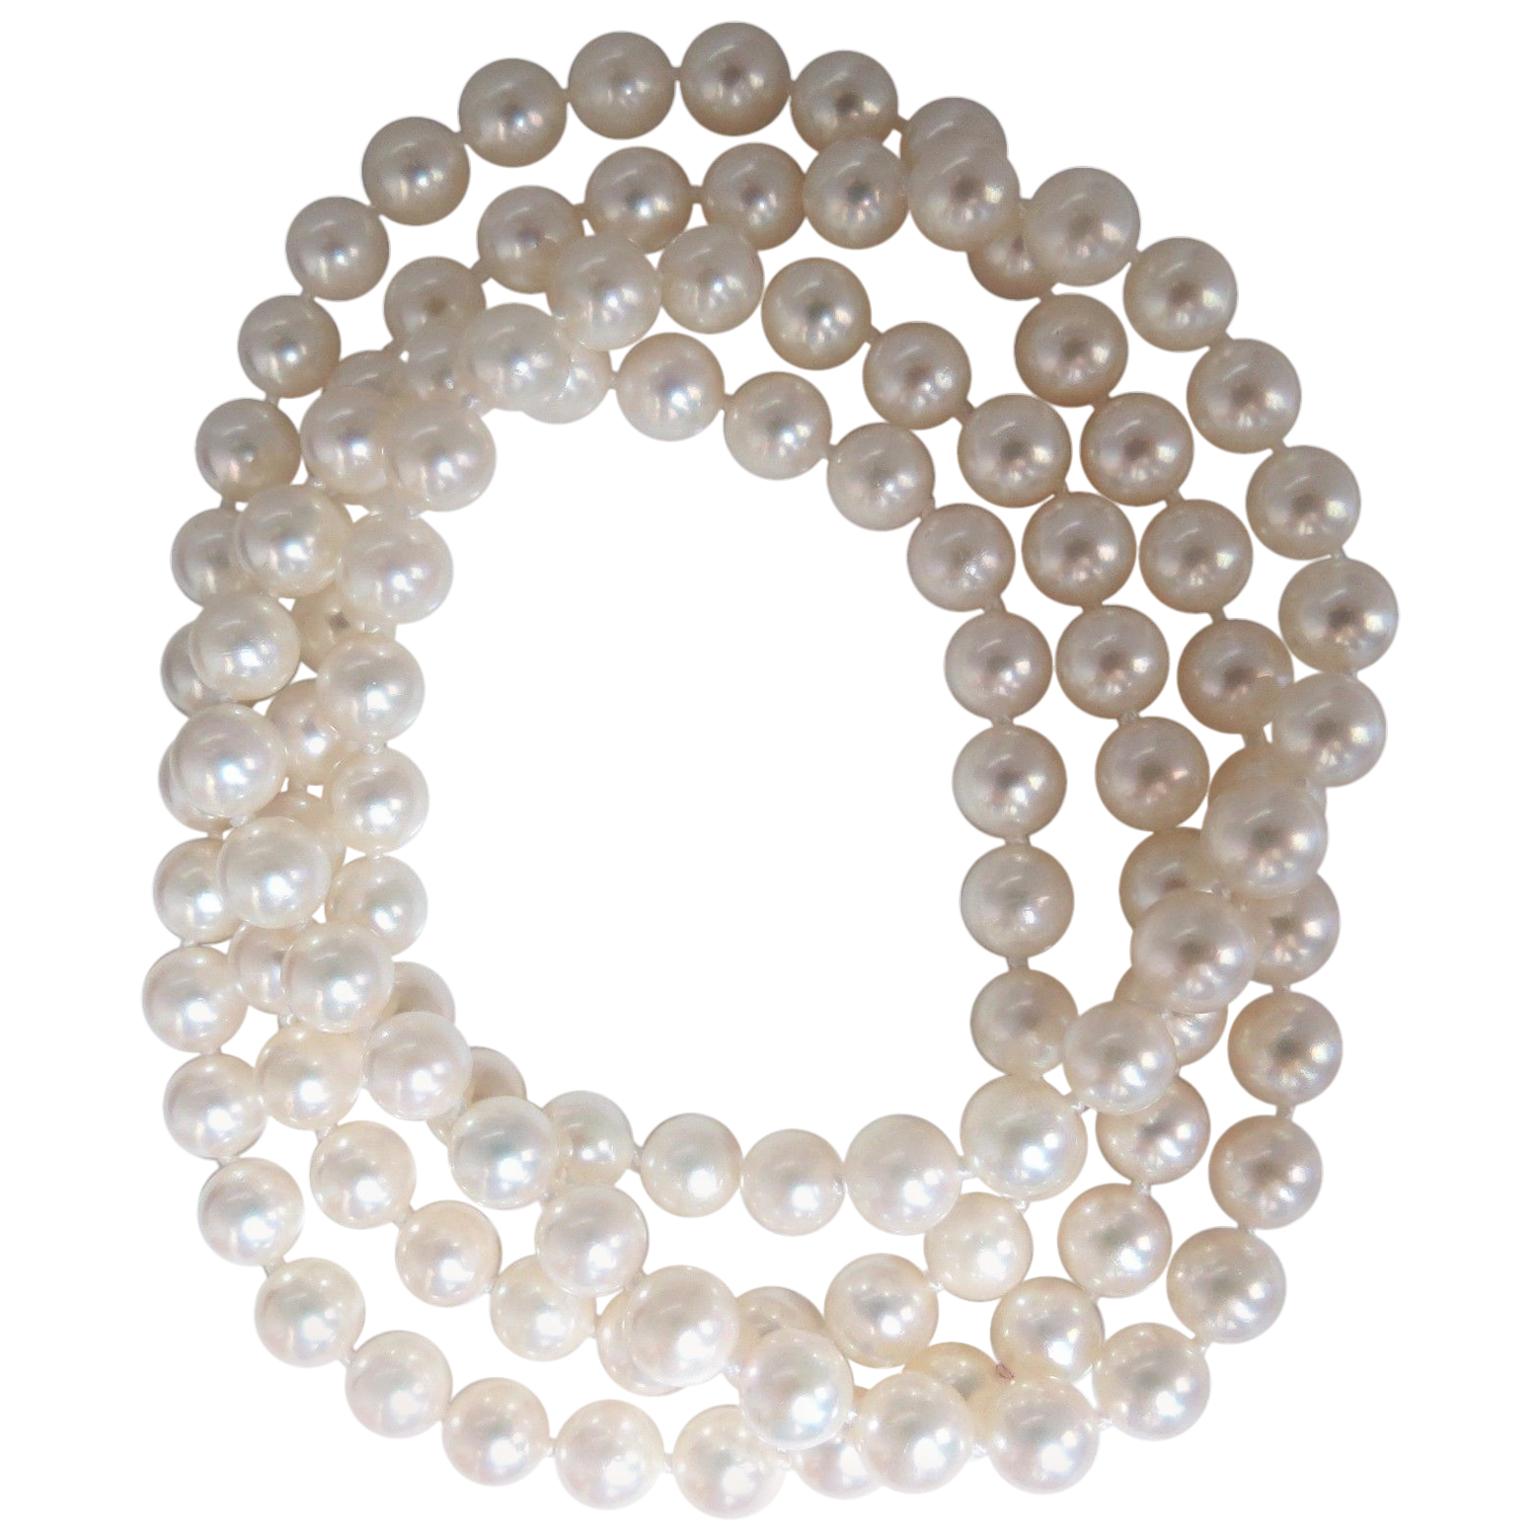 Natural Japanese Pearls Endless Necklace / Double Wrap